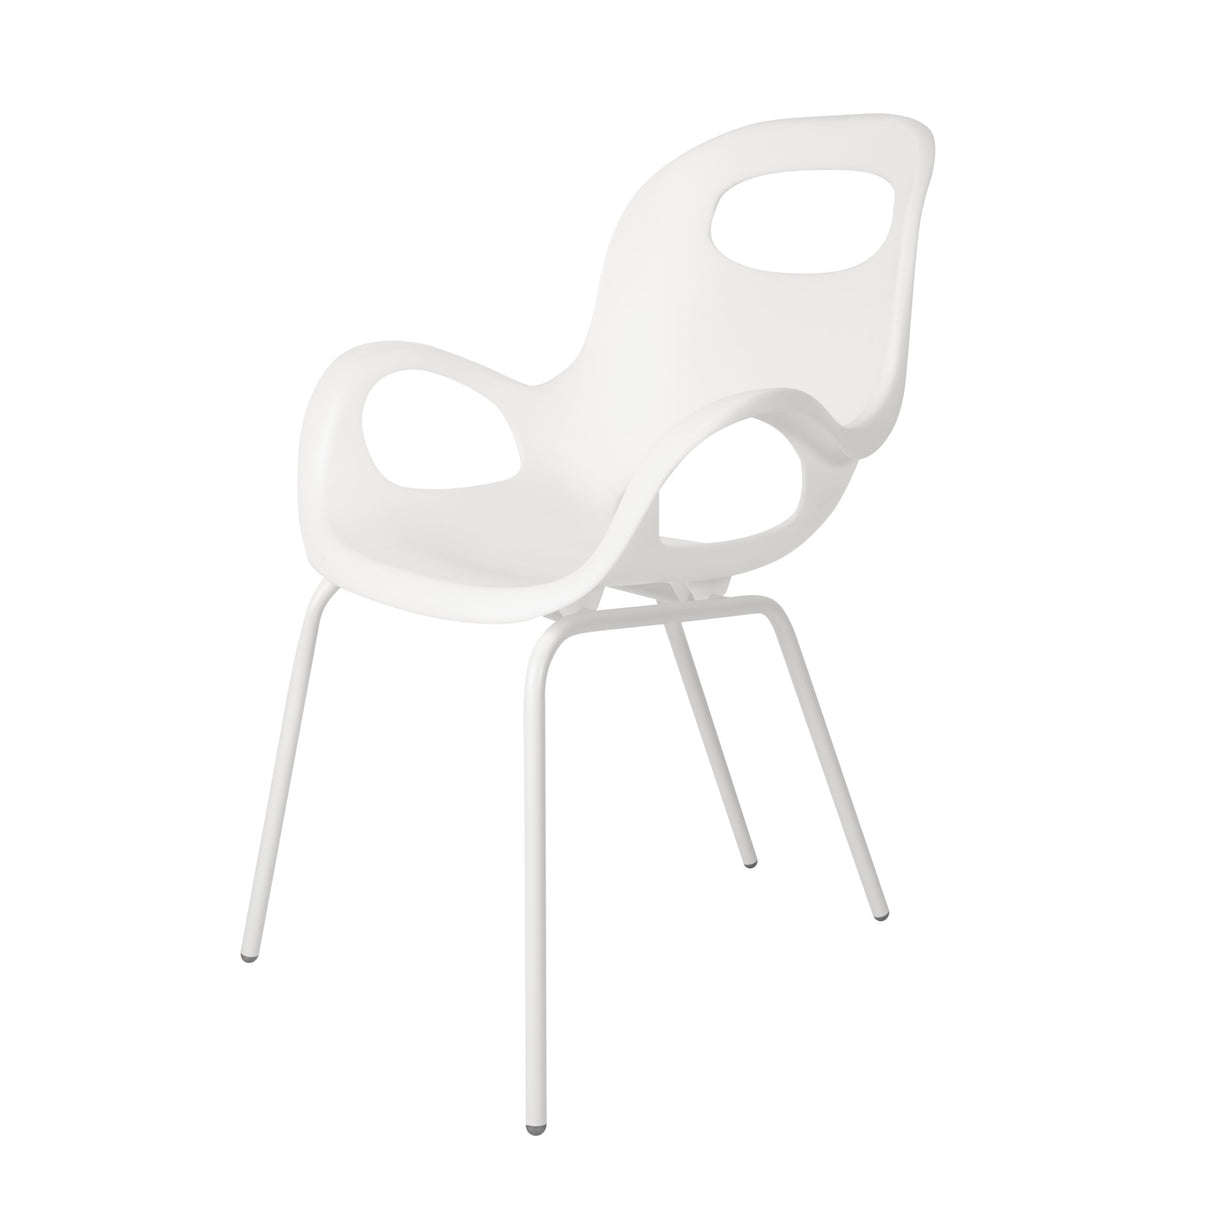 Chairs & Stools | color: White